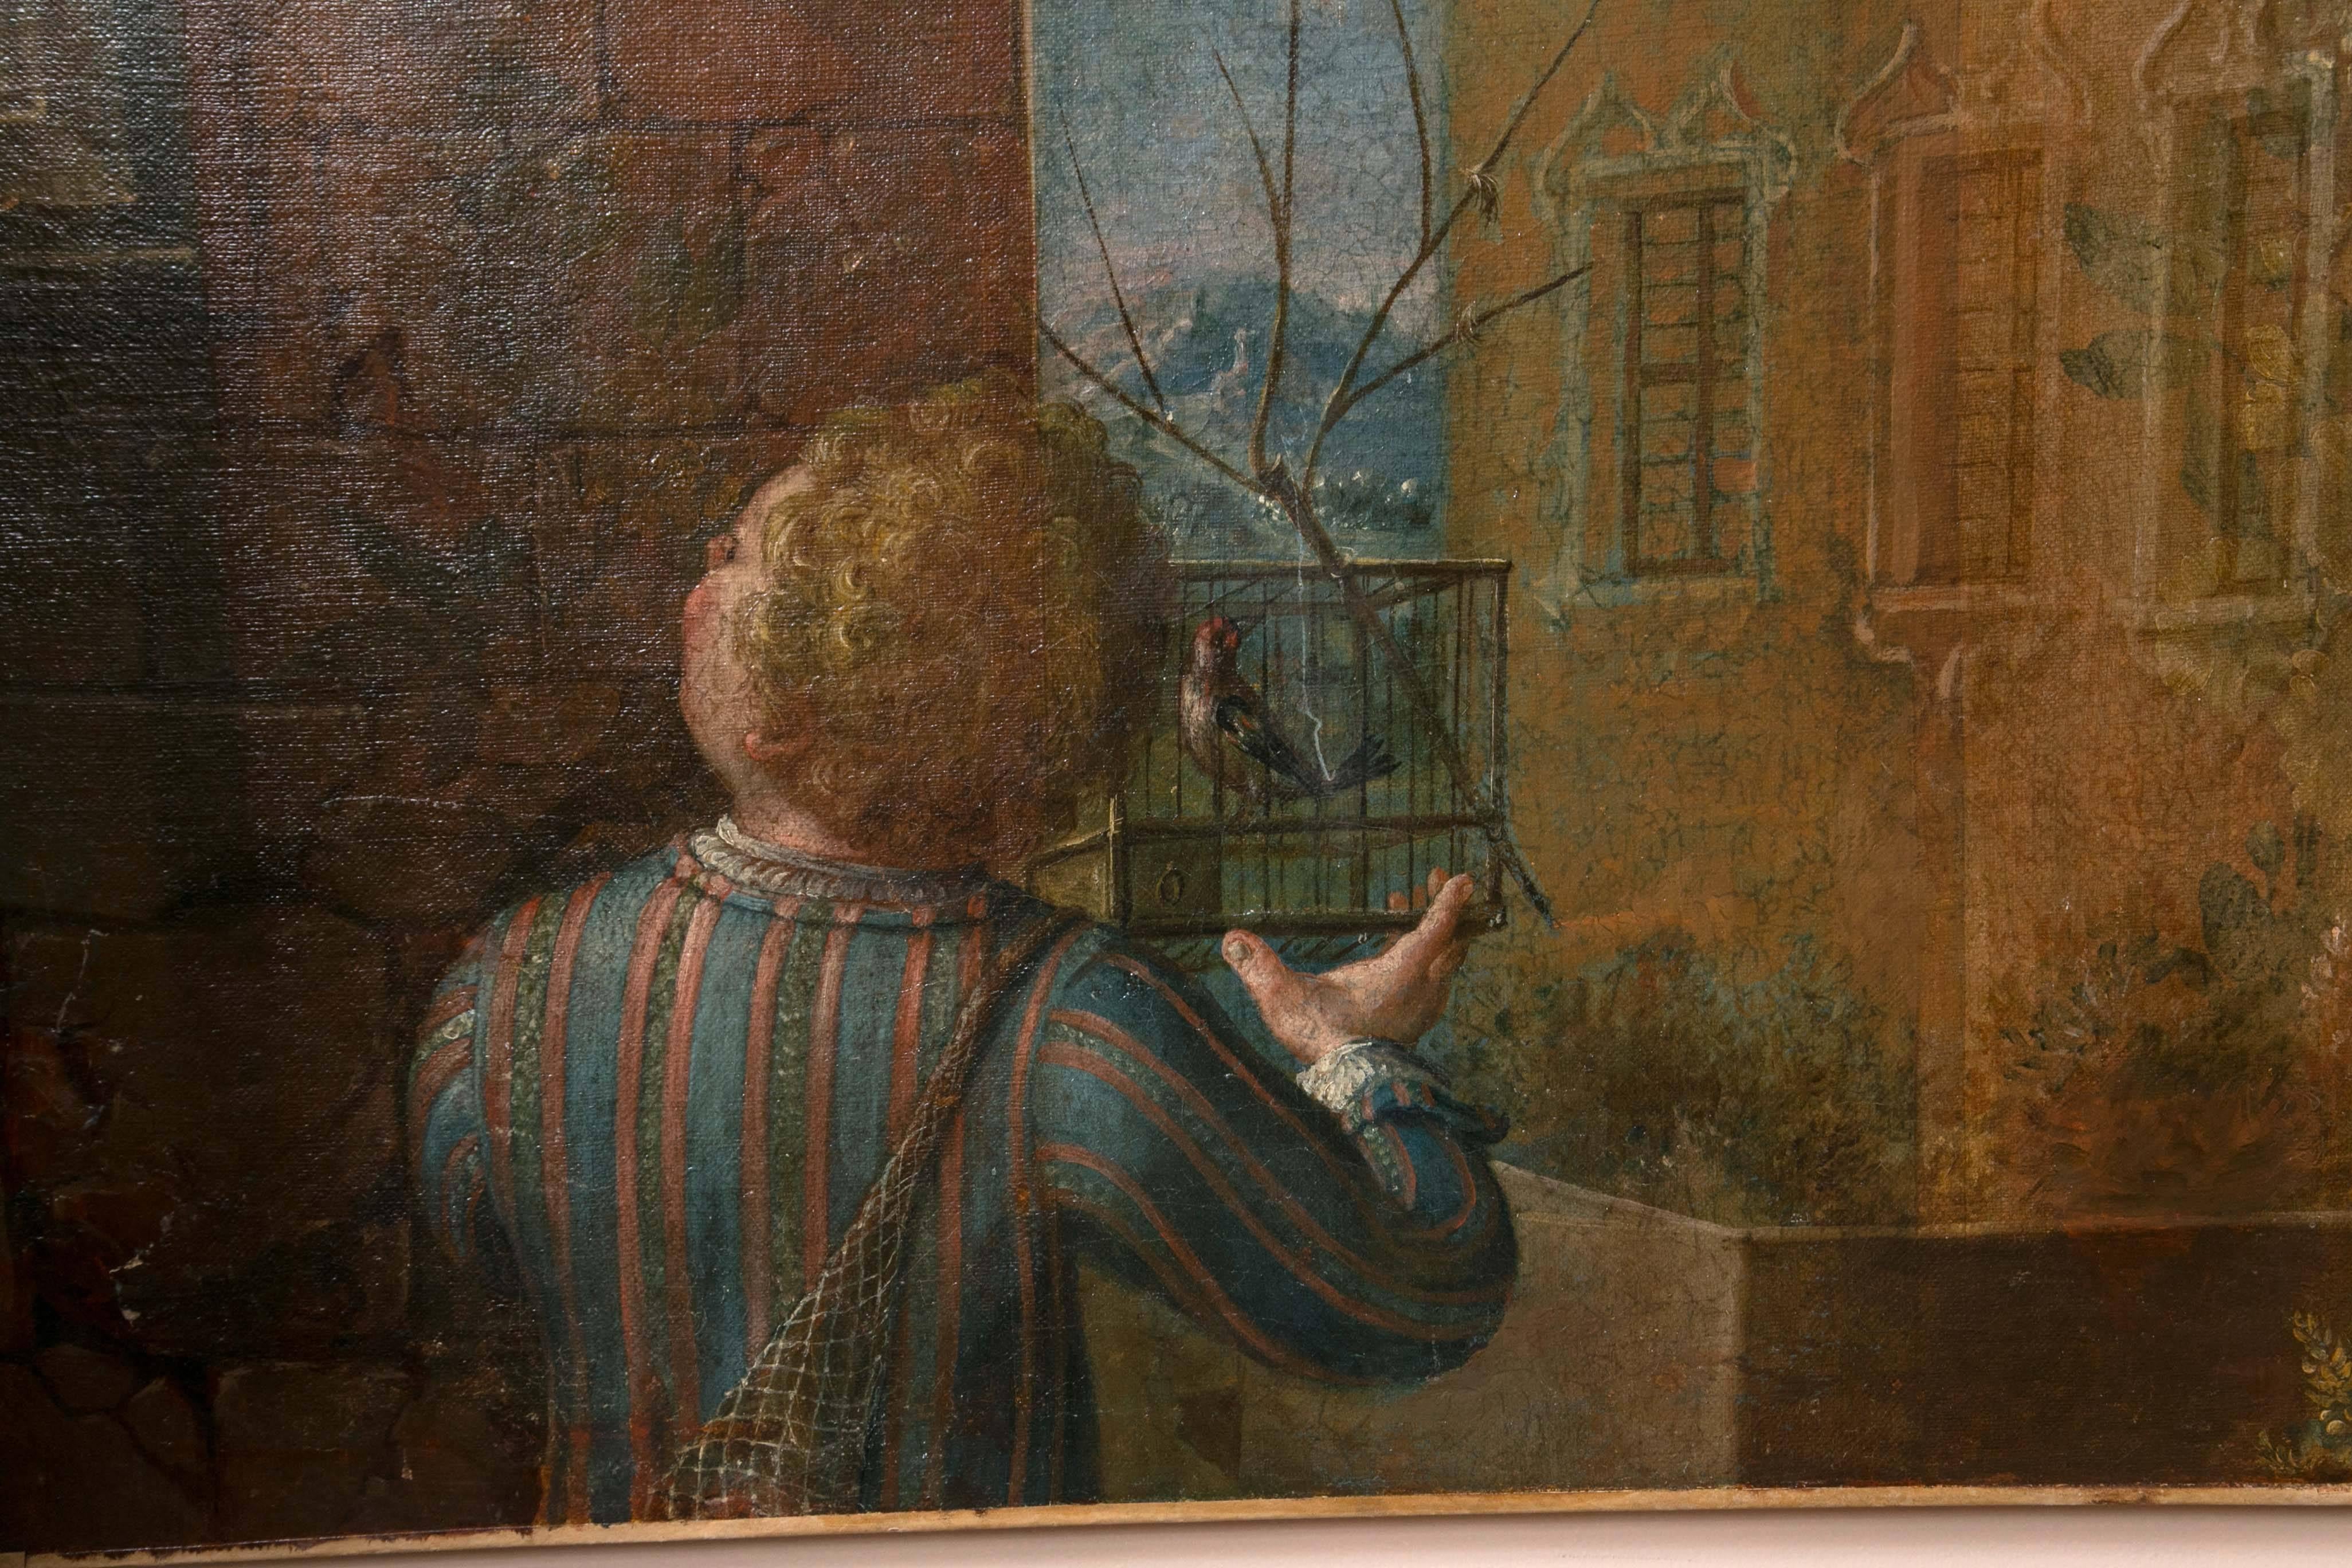 A youth holds a bird cage while looking up other birds. He is surrounded by buildings with crumbling facades, balustrades and statues.
Is he looking to set his bird free or to capture another?